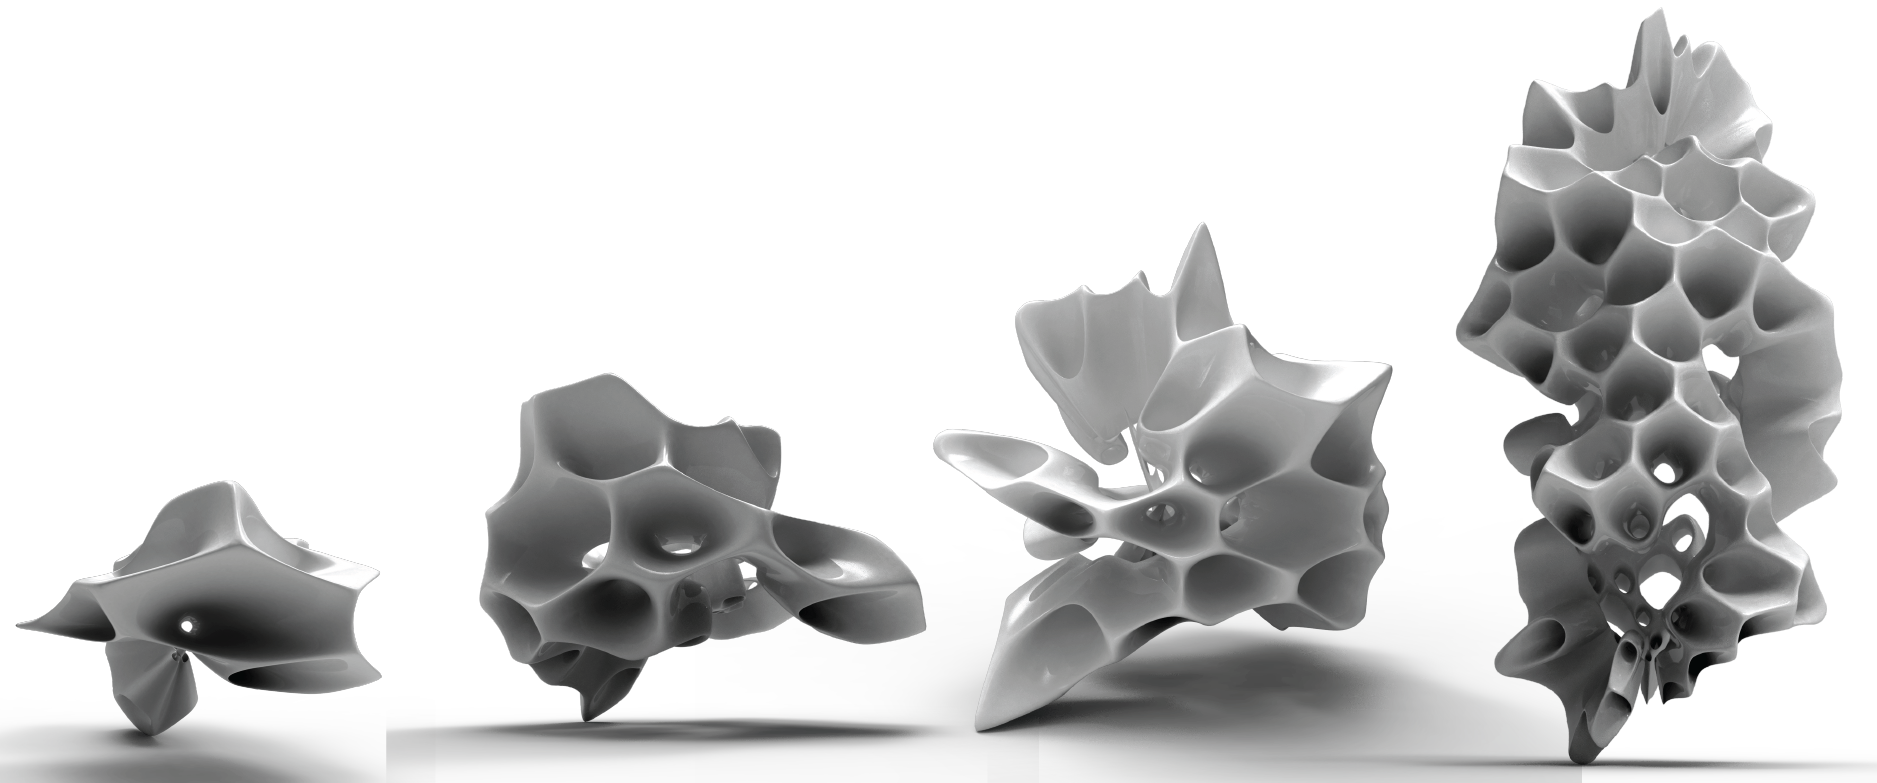 Variants of the shape and structure of HIVE possible as a result of the parametric approach to the design.